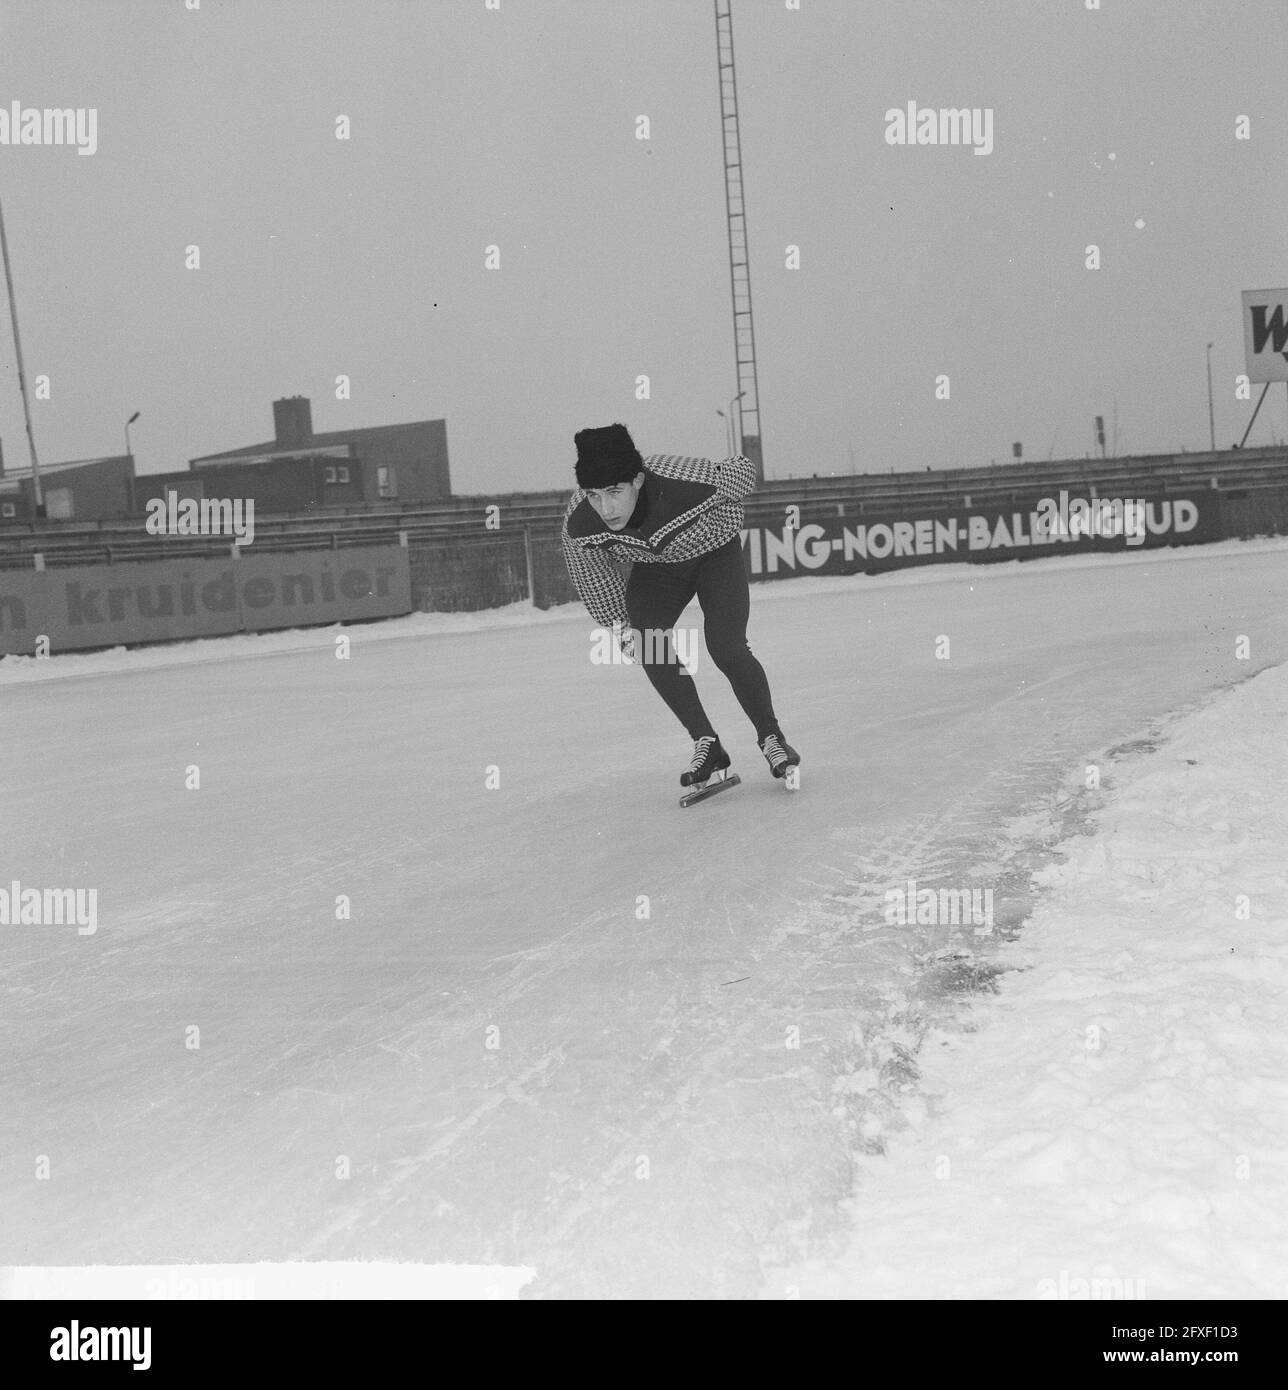 Training for the Dutch core team on the Deventer ice rink. Kees Verkerk, December 12, 1963, skating, sports, The Netherlands, 20th century press agency photo, news to remember, documentary, historic photography 1945-1990, visual stories, human history of the Twentieth Century, capturing moments in time Stock Photo